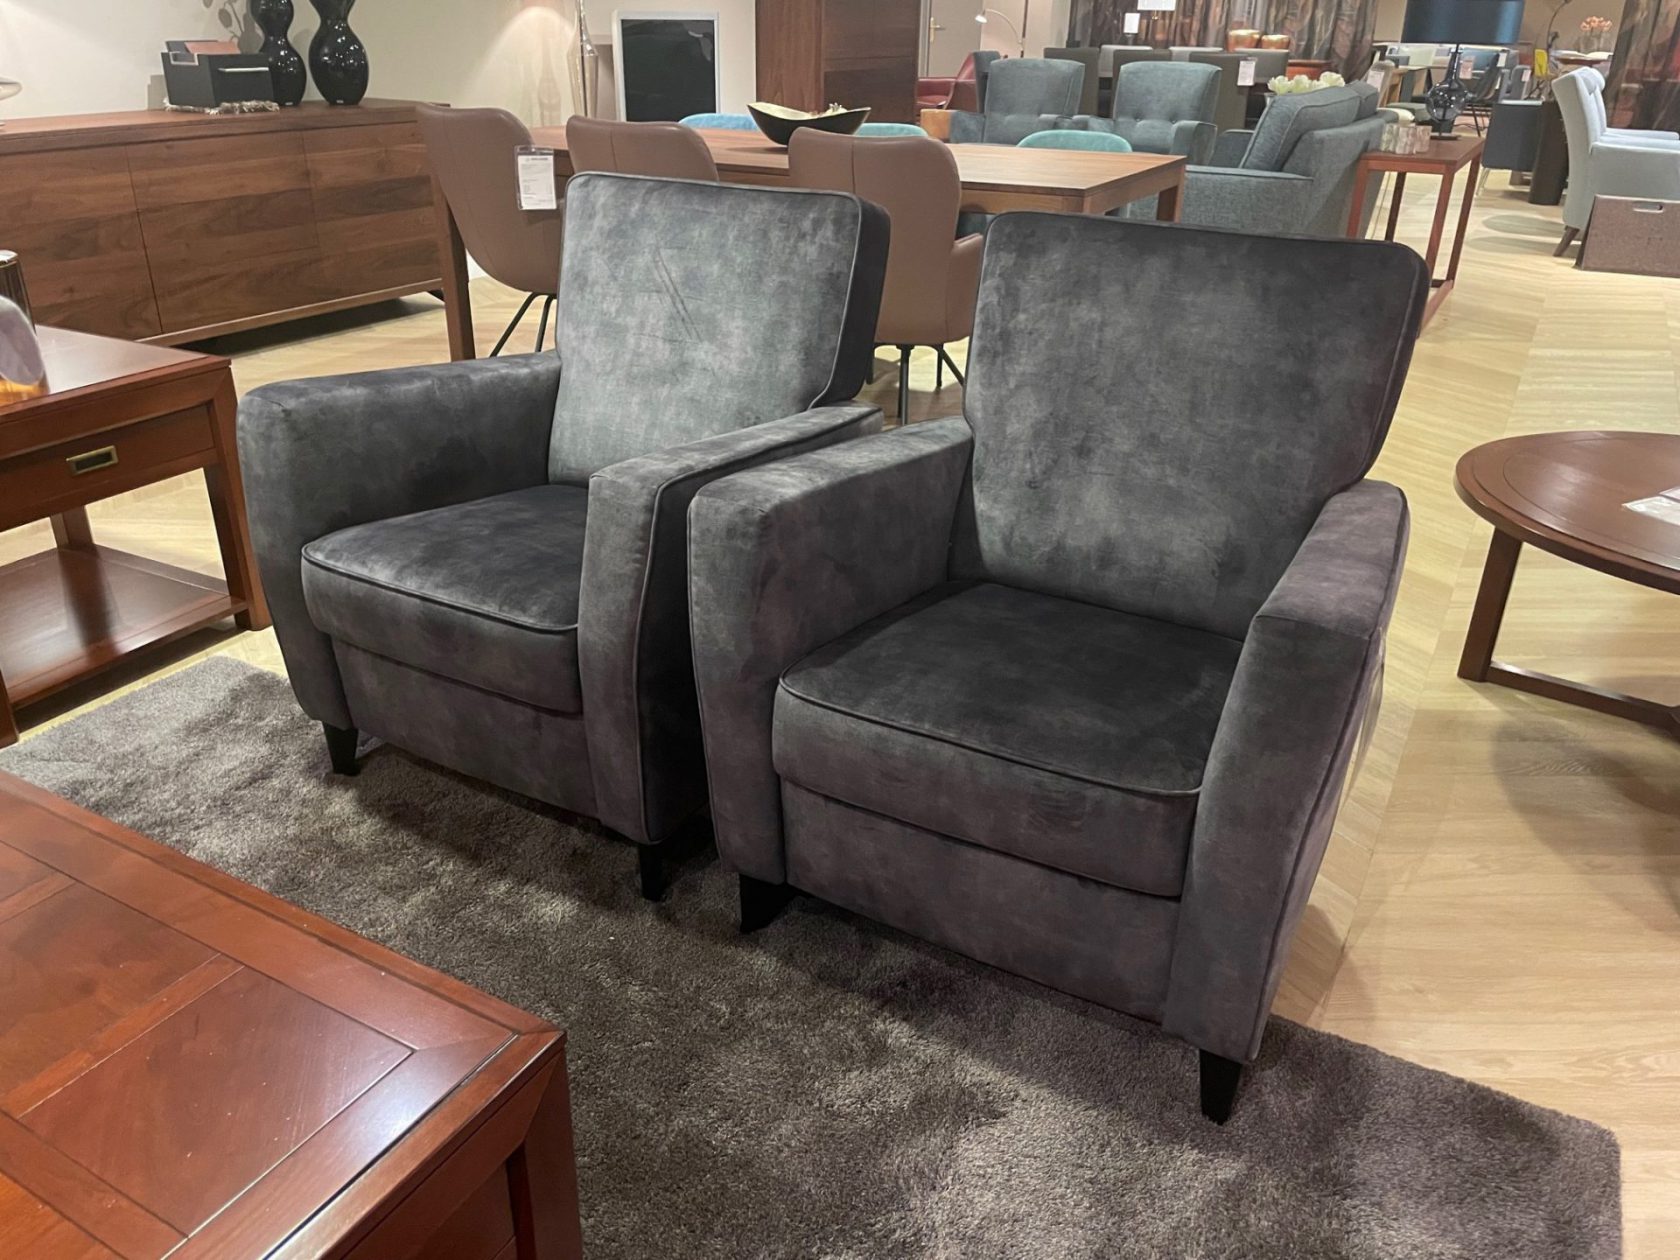 Vidato Torcy fauteuil opruiming outlet